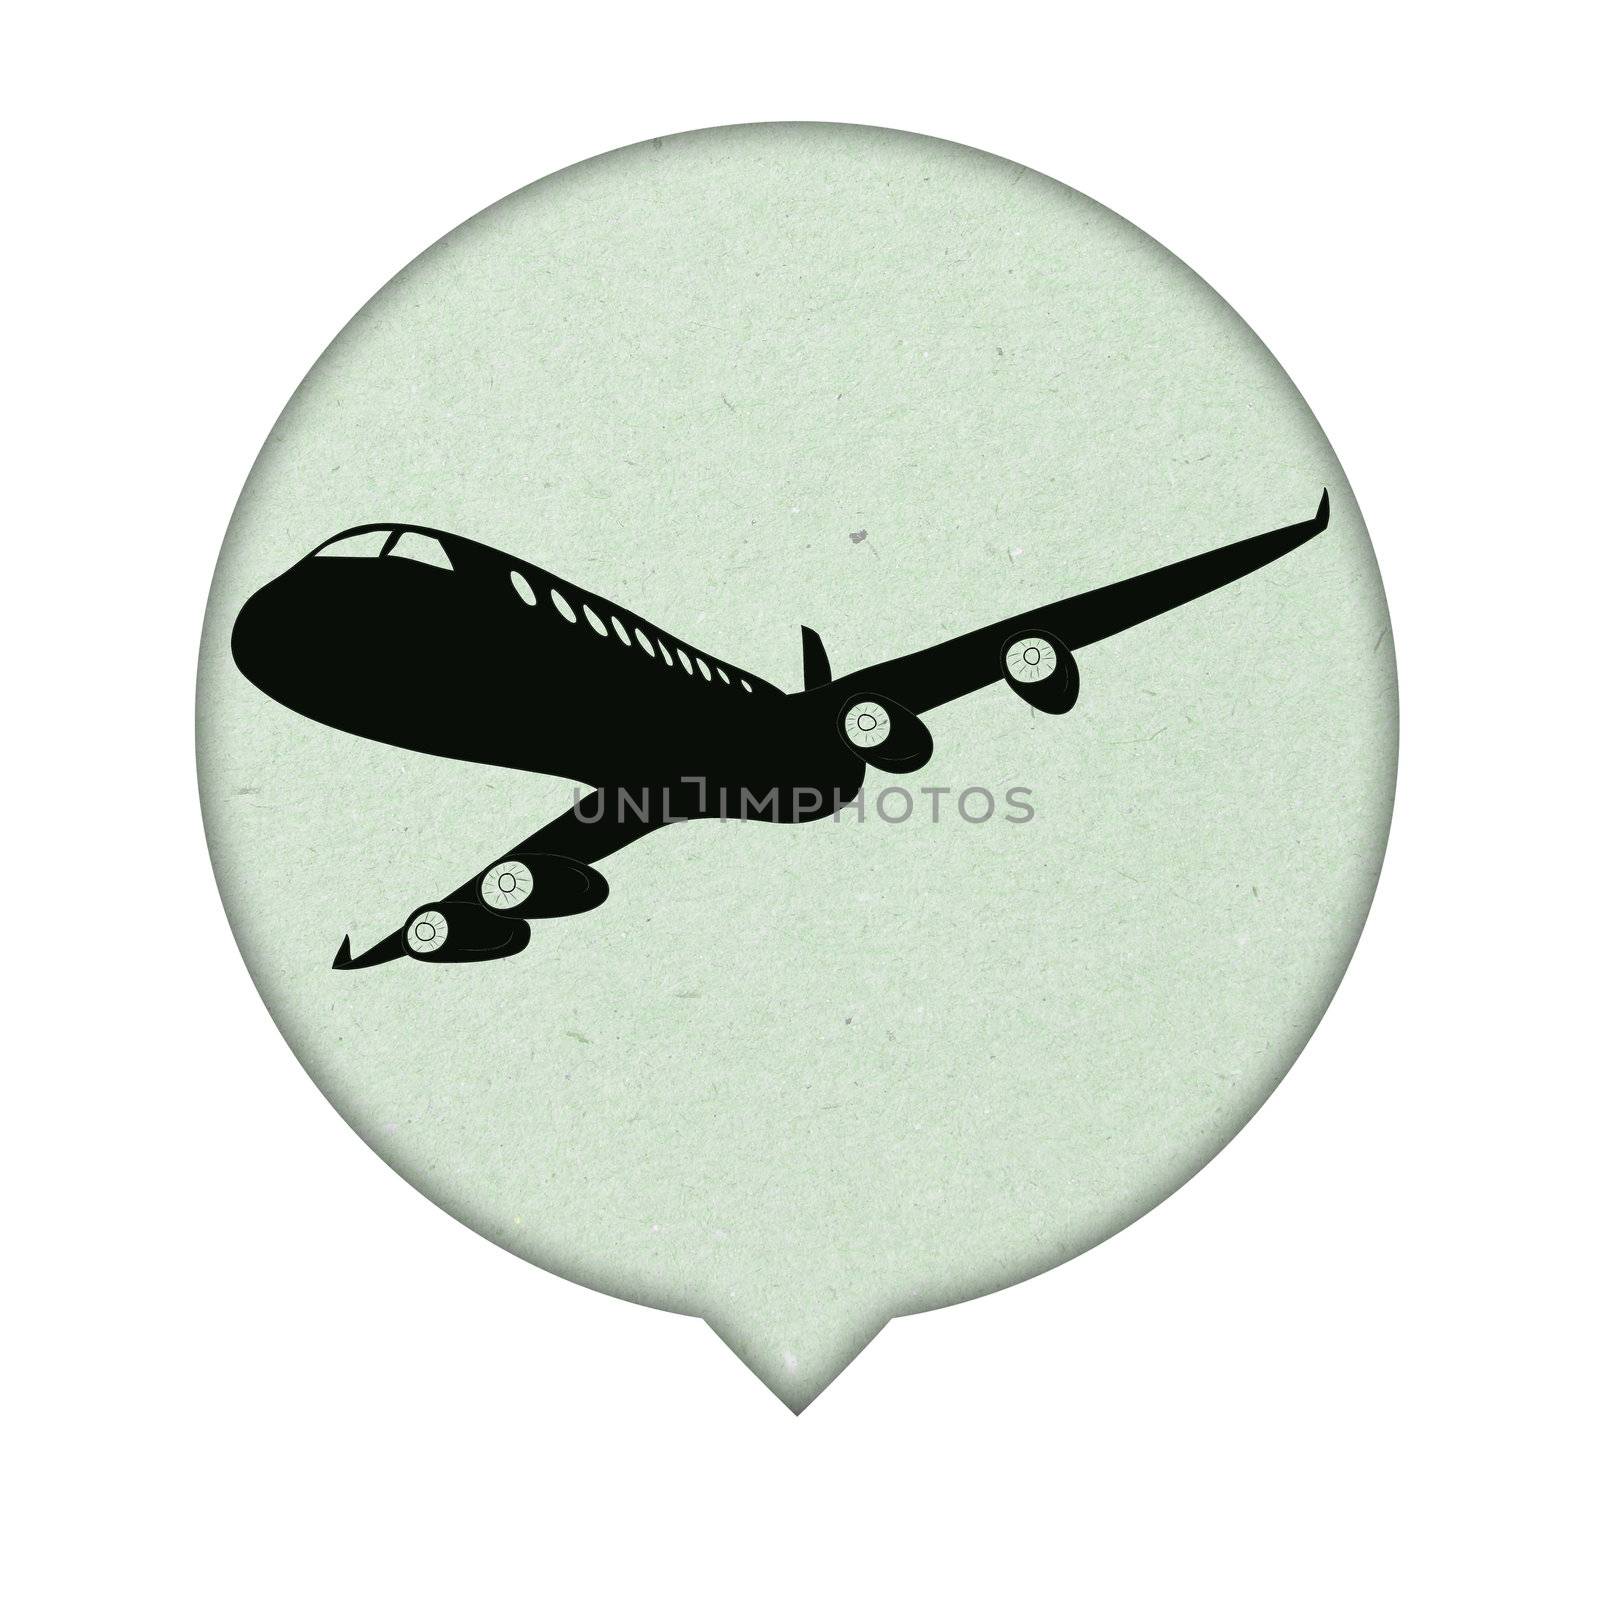 Airplane Sign icon on paper  background by rufous